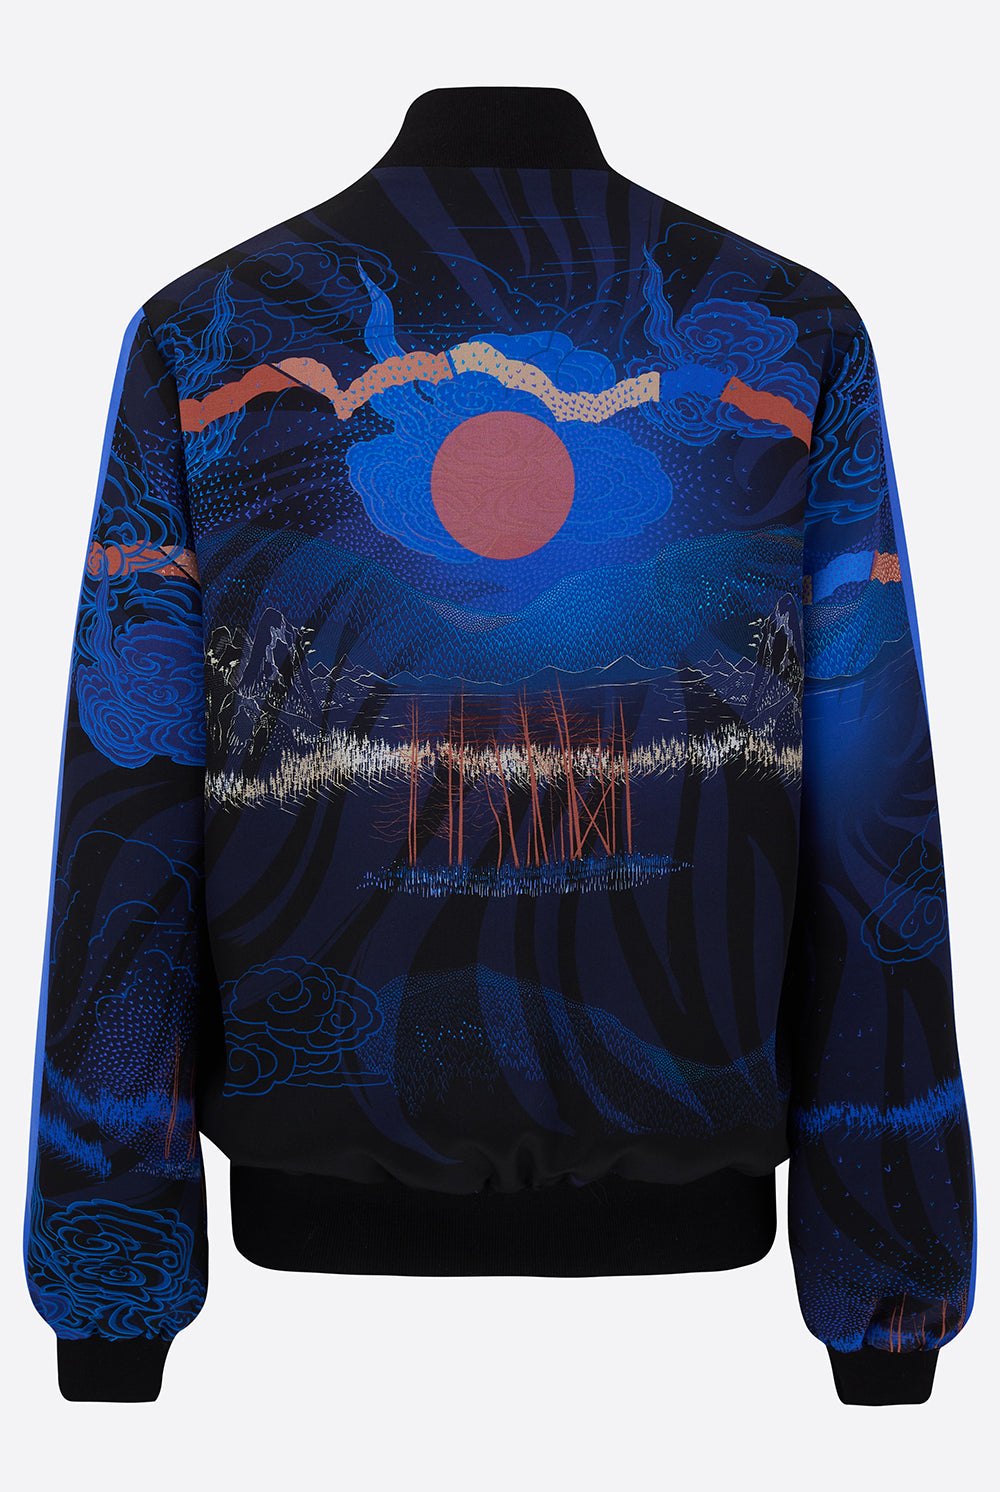 Back of a Silk Bomber jacket with a Japanese landscape in blues and a pink sun